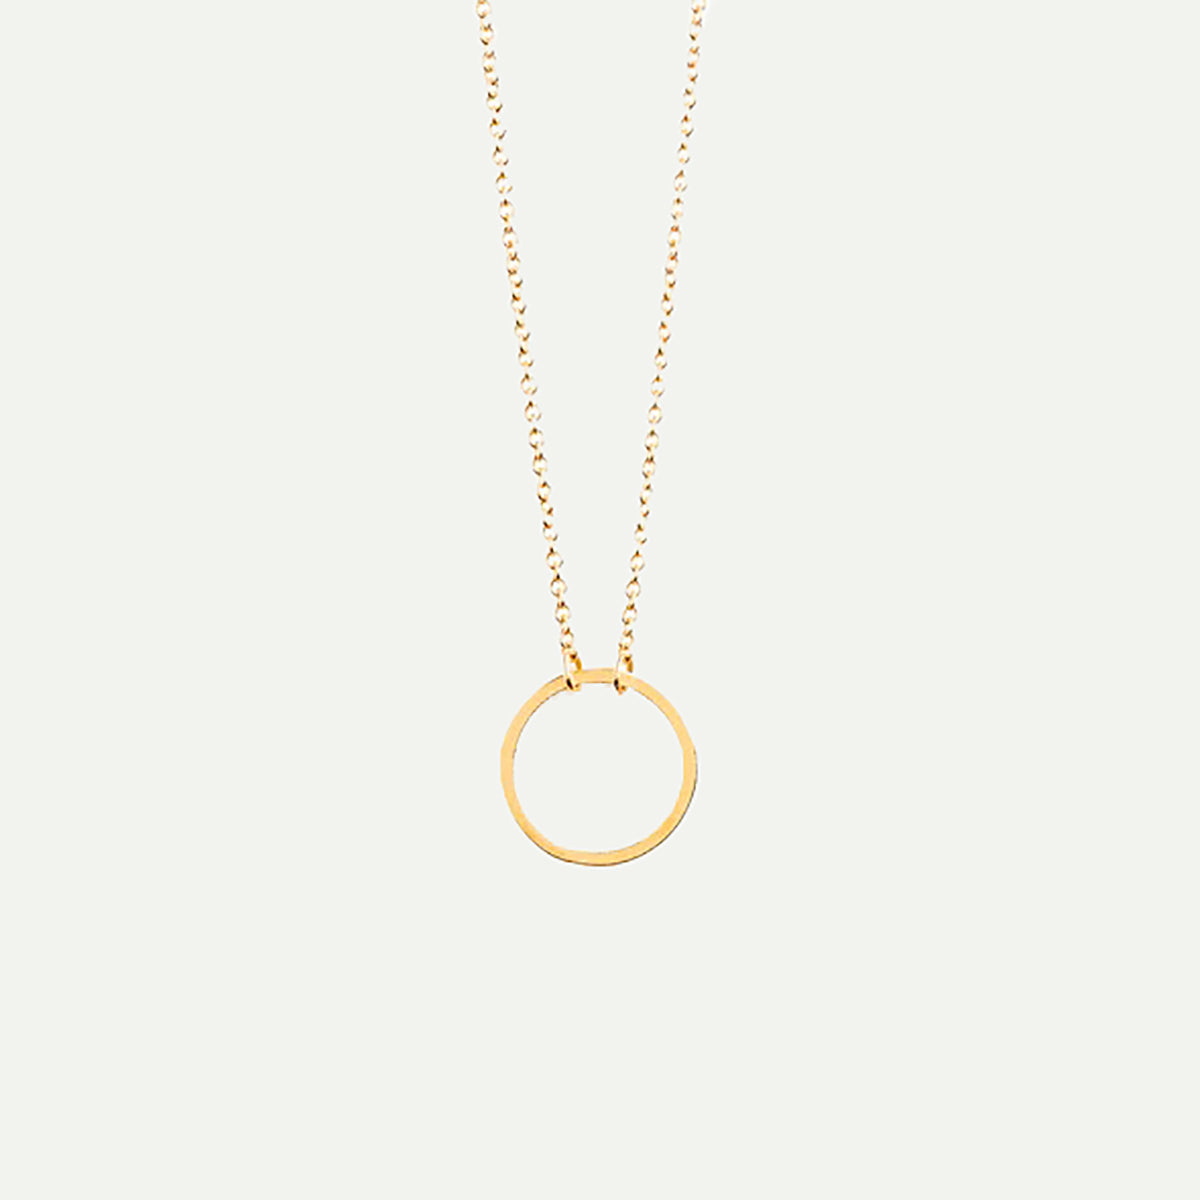 Wanderlust Life Unity Gold Chain Necklace